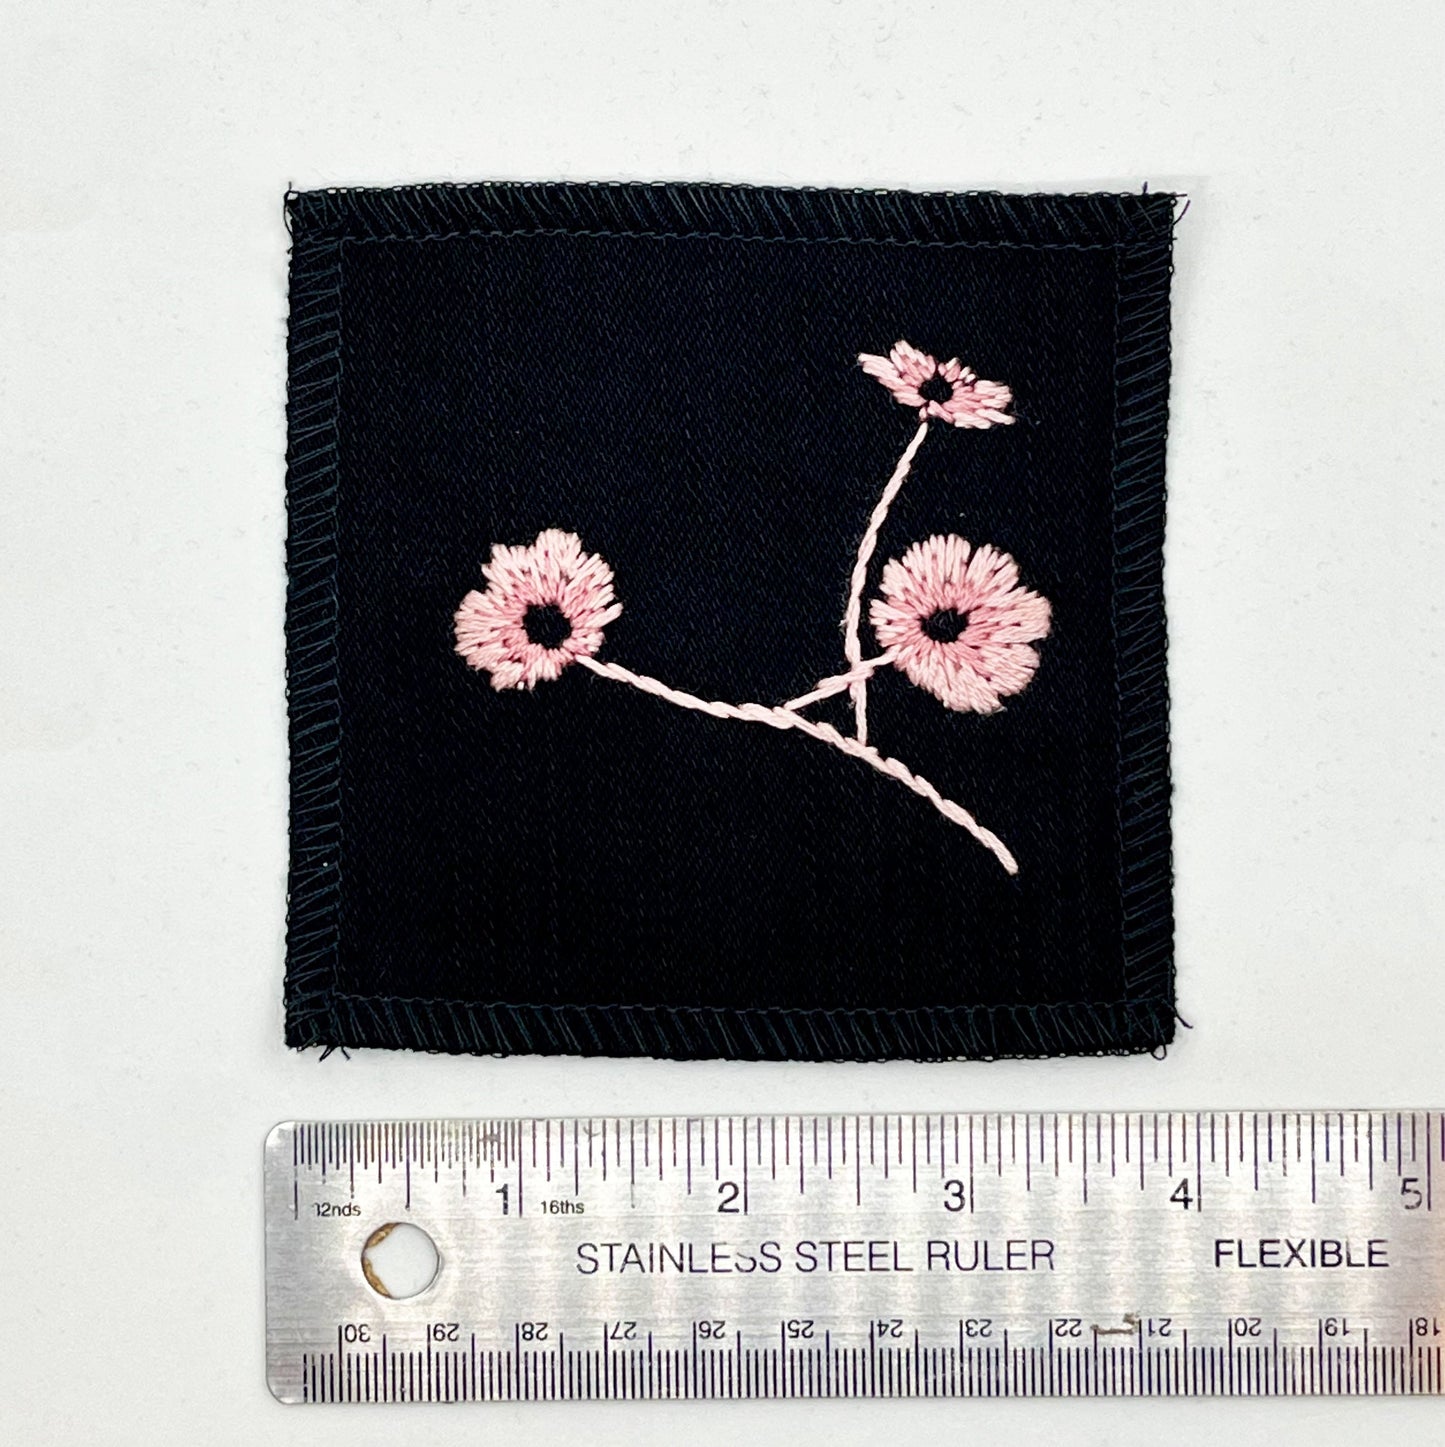 a black square patch, hand embroidered with three poppies on a stem, in shades of pink, with overlocked edges, placed next to a metal ruler to show a width of four inches, on a white background